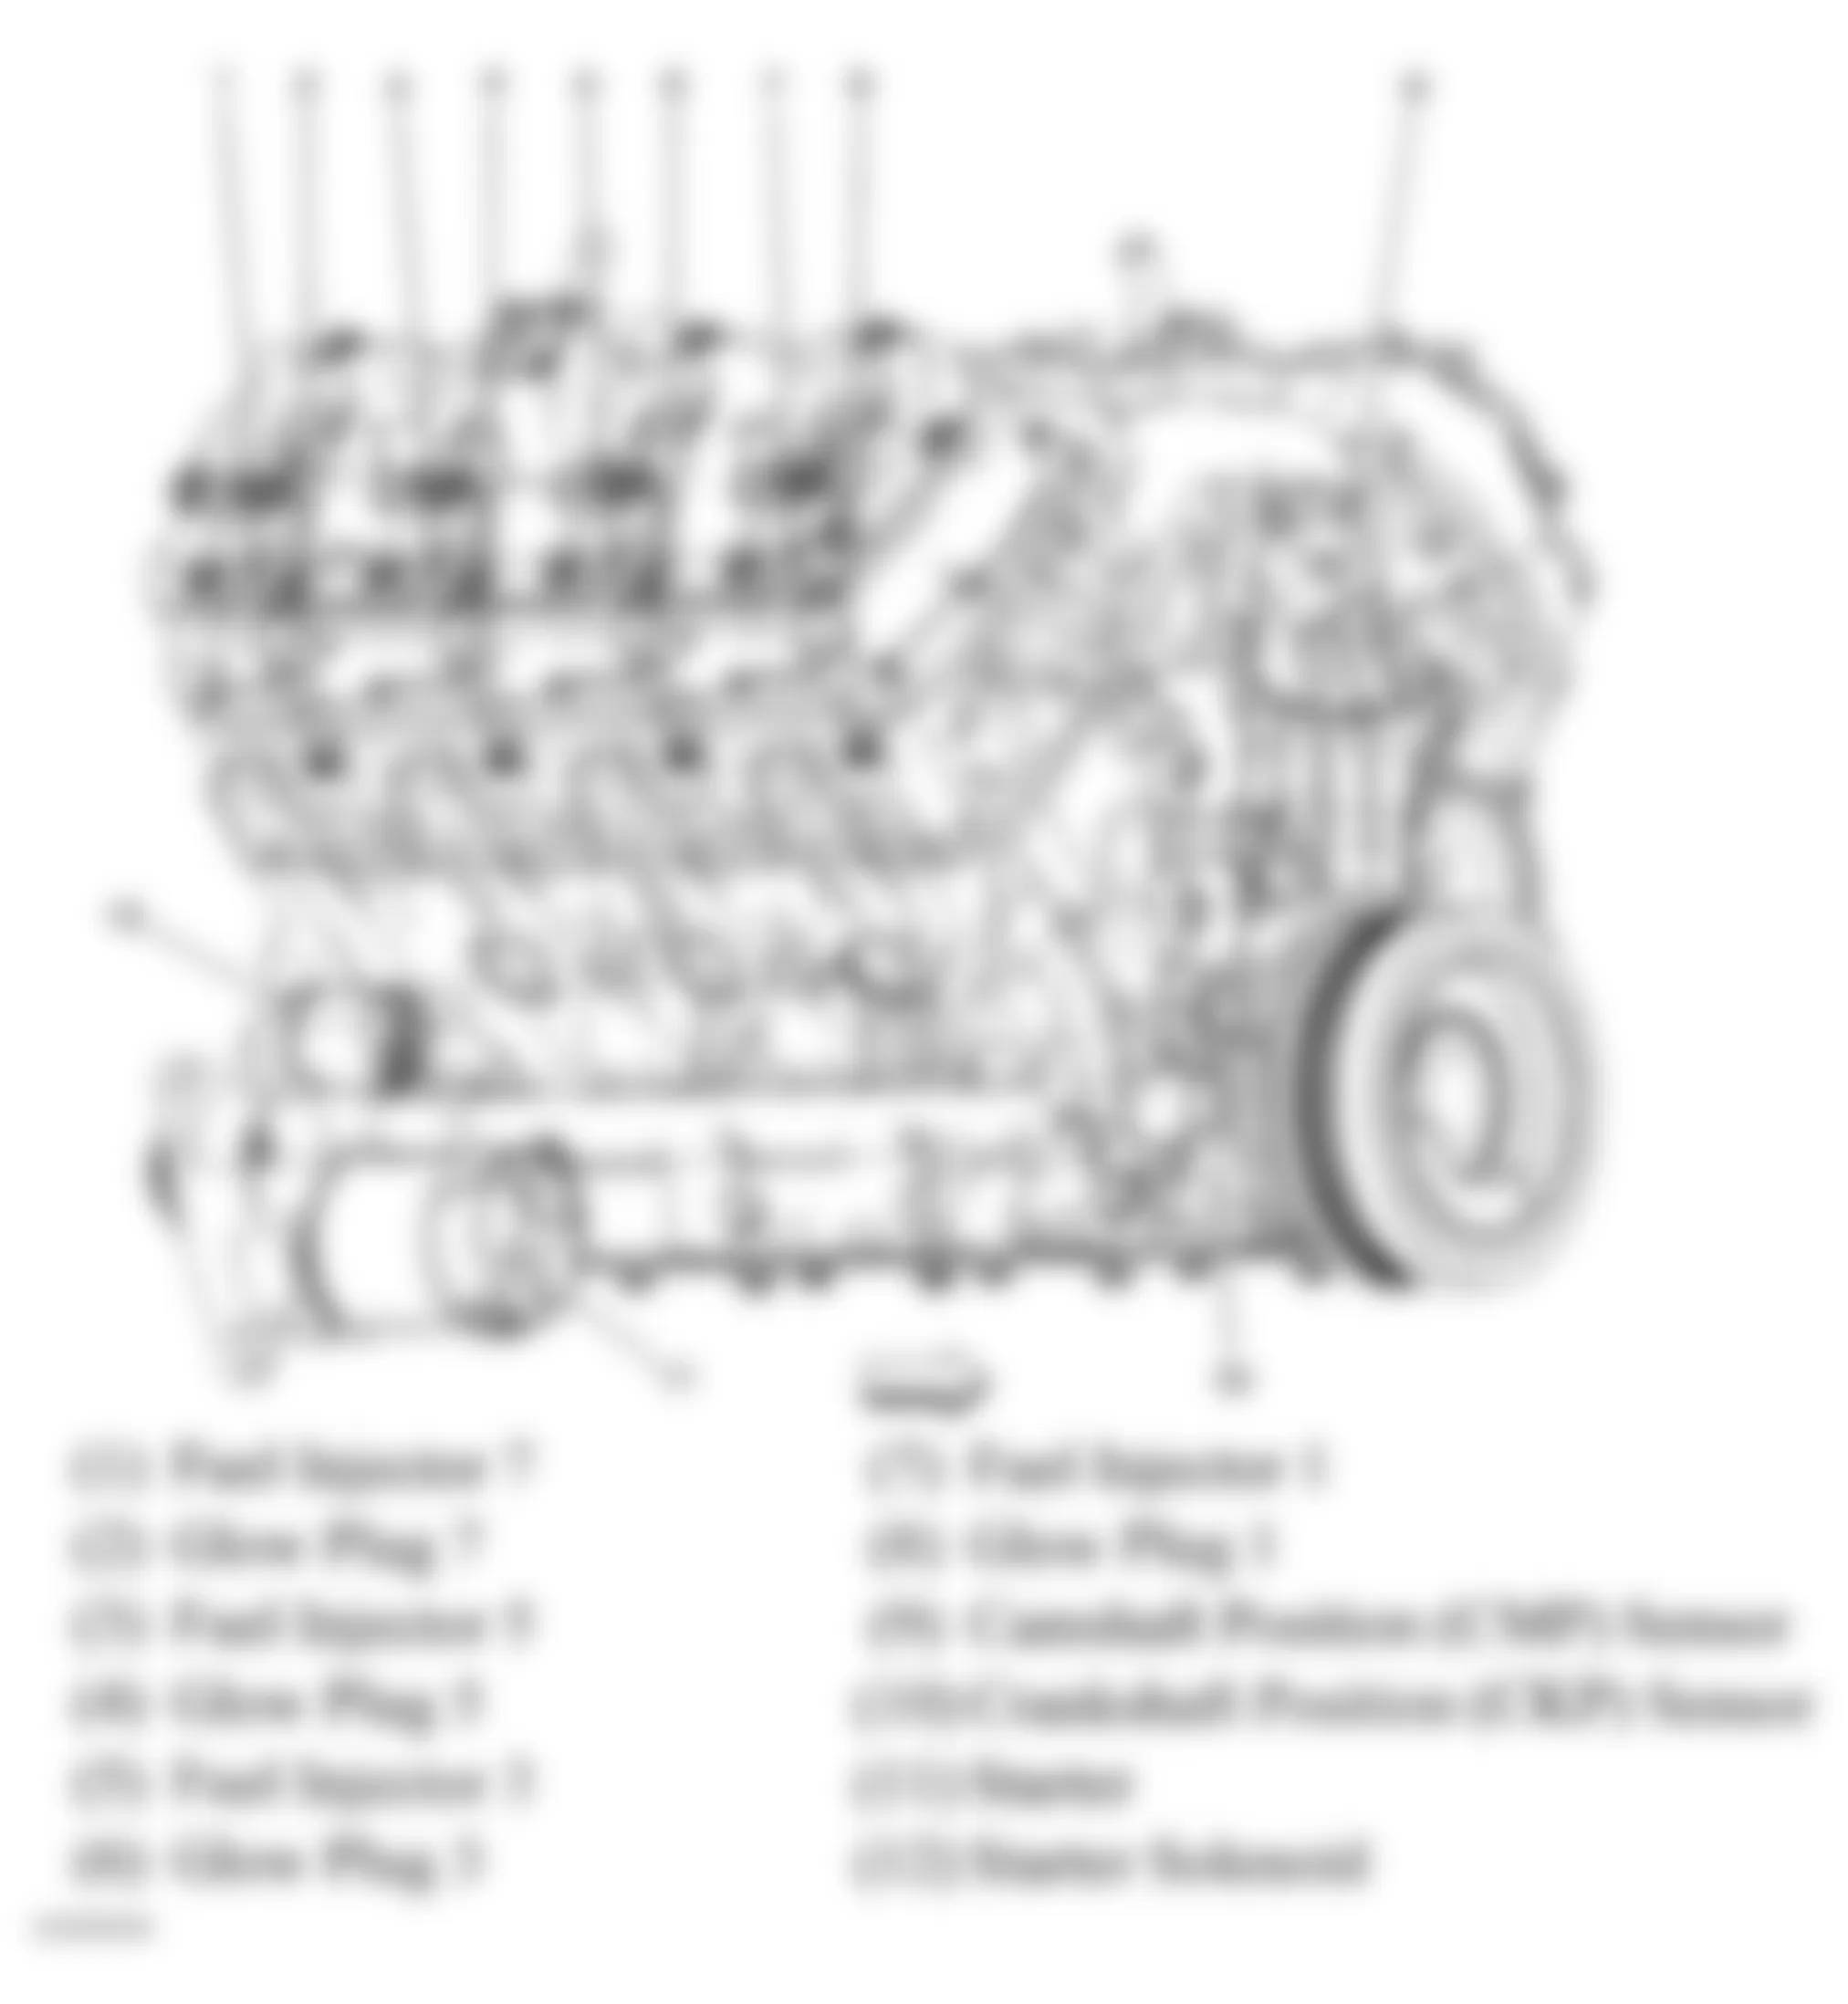 GMC Savana G2500 2010 - Component Locations -  Right Side Of Engine (6.6L)